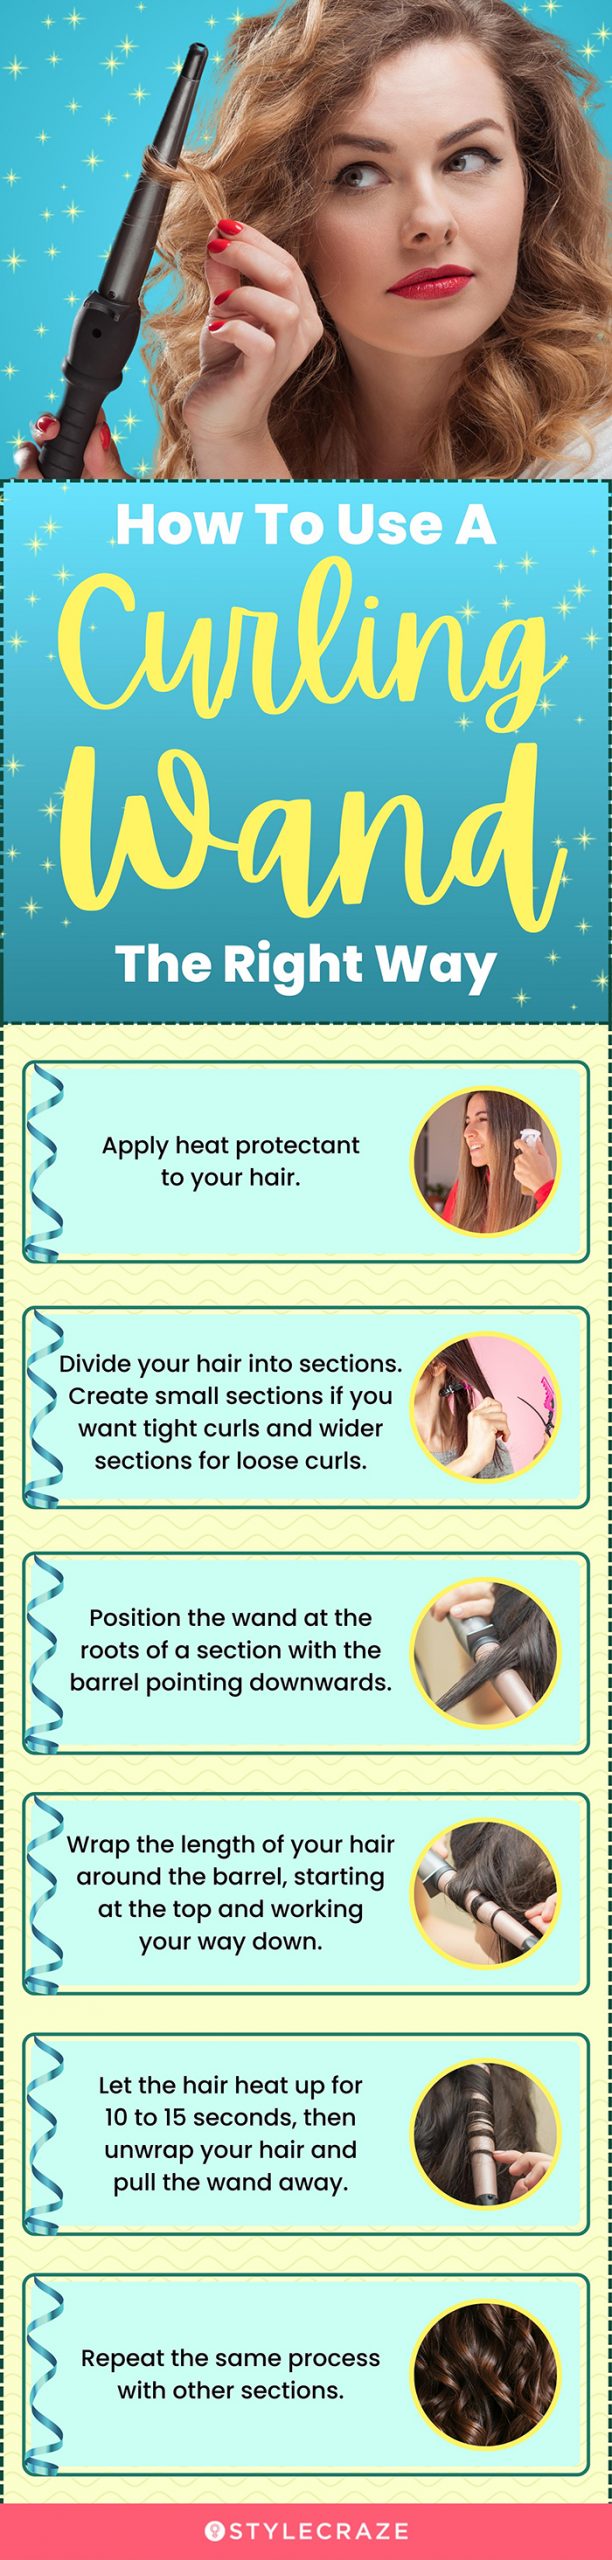 How To Use A Curling Wand The Right Way (infographic)